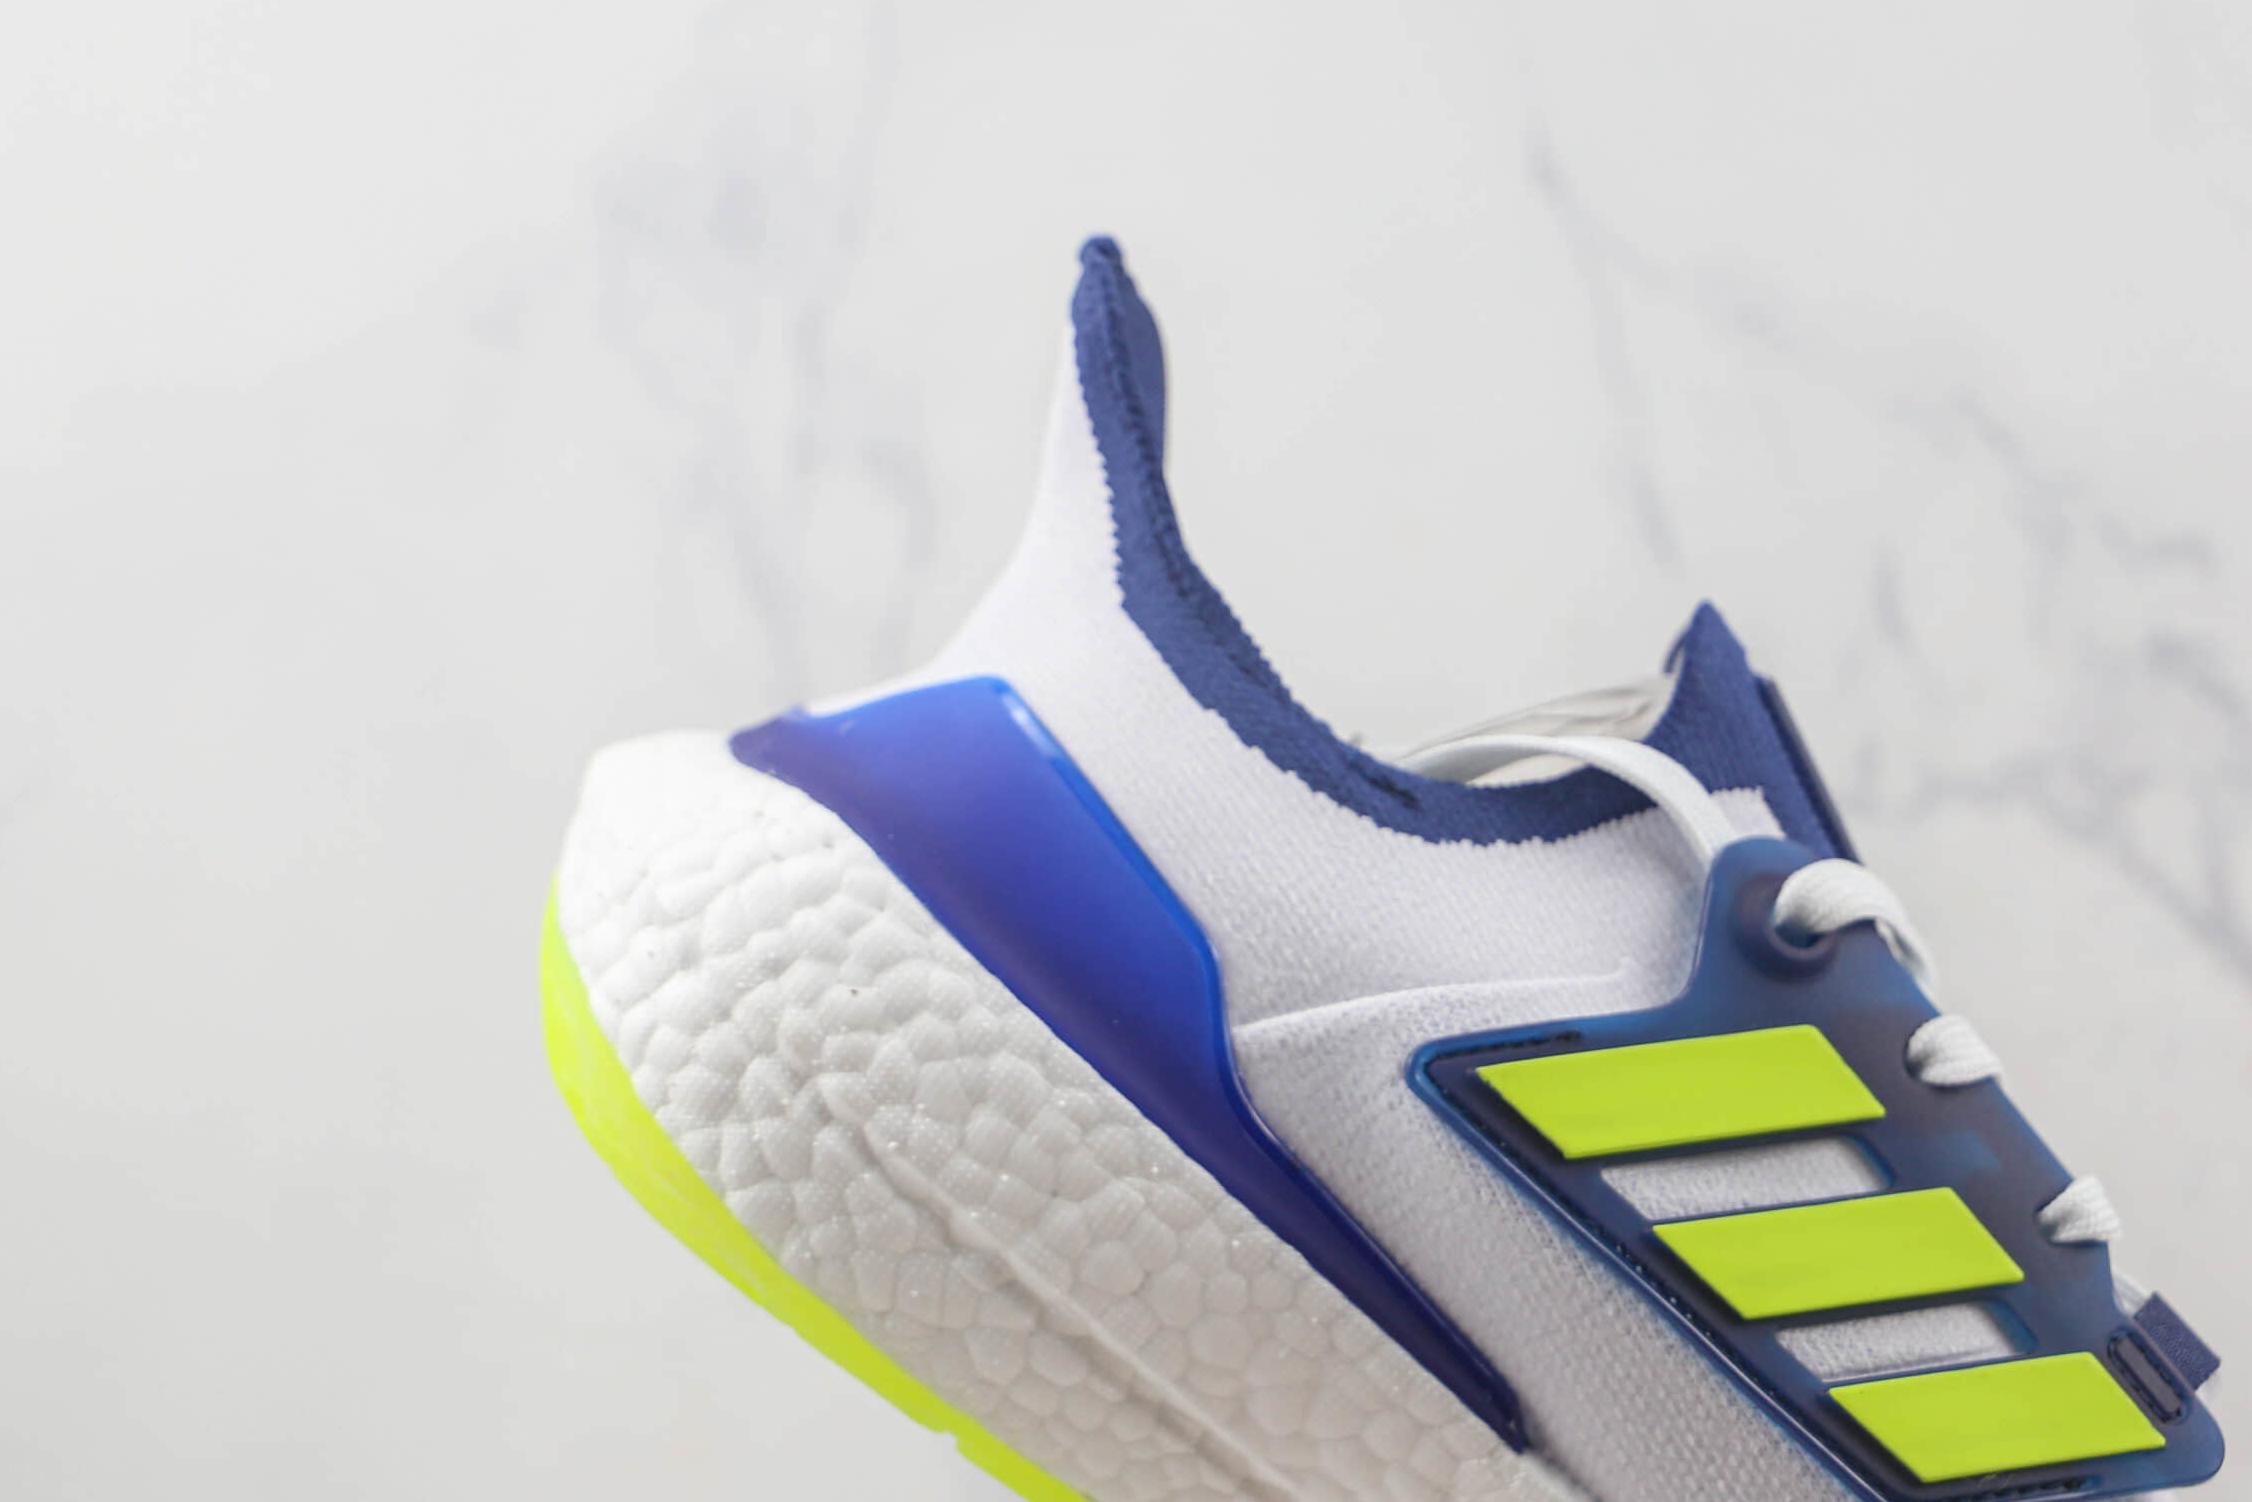 Adidas UltraBoost 22 White Solar Yellow Blue GZ7211 | Shop Now for a Stylish Look!